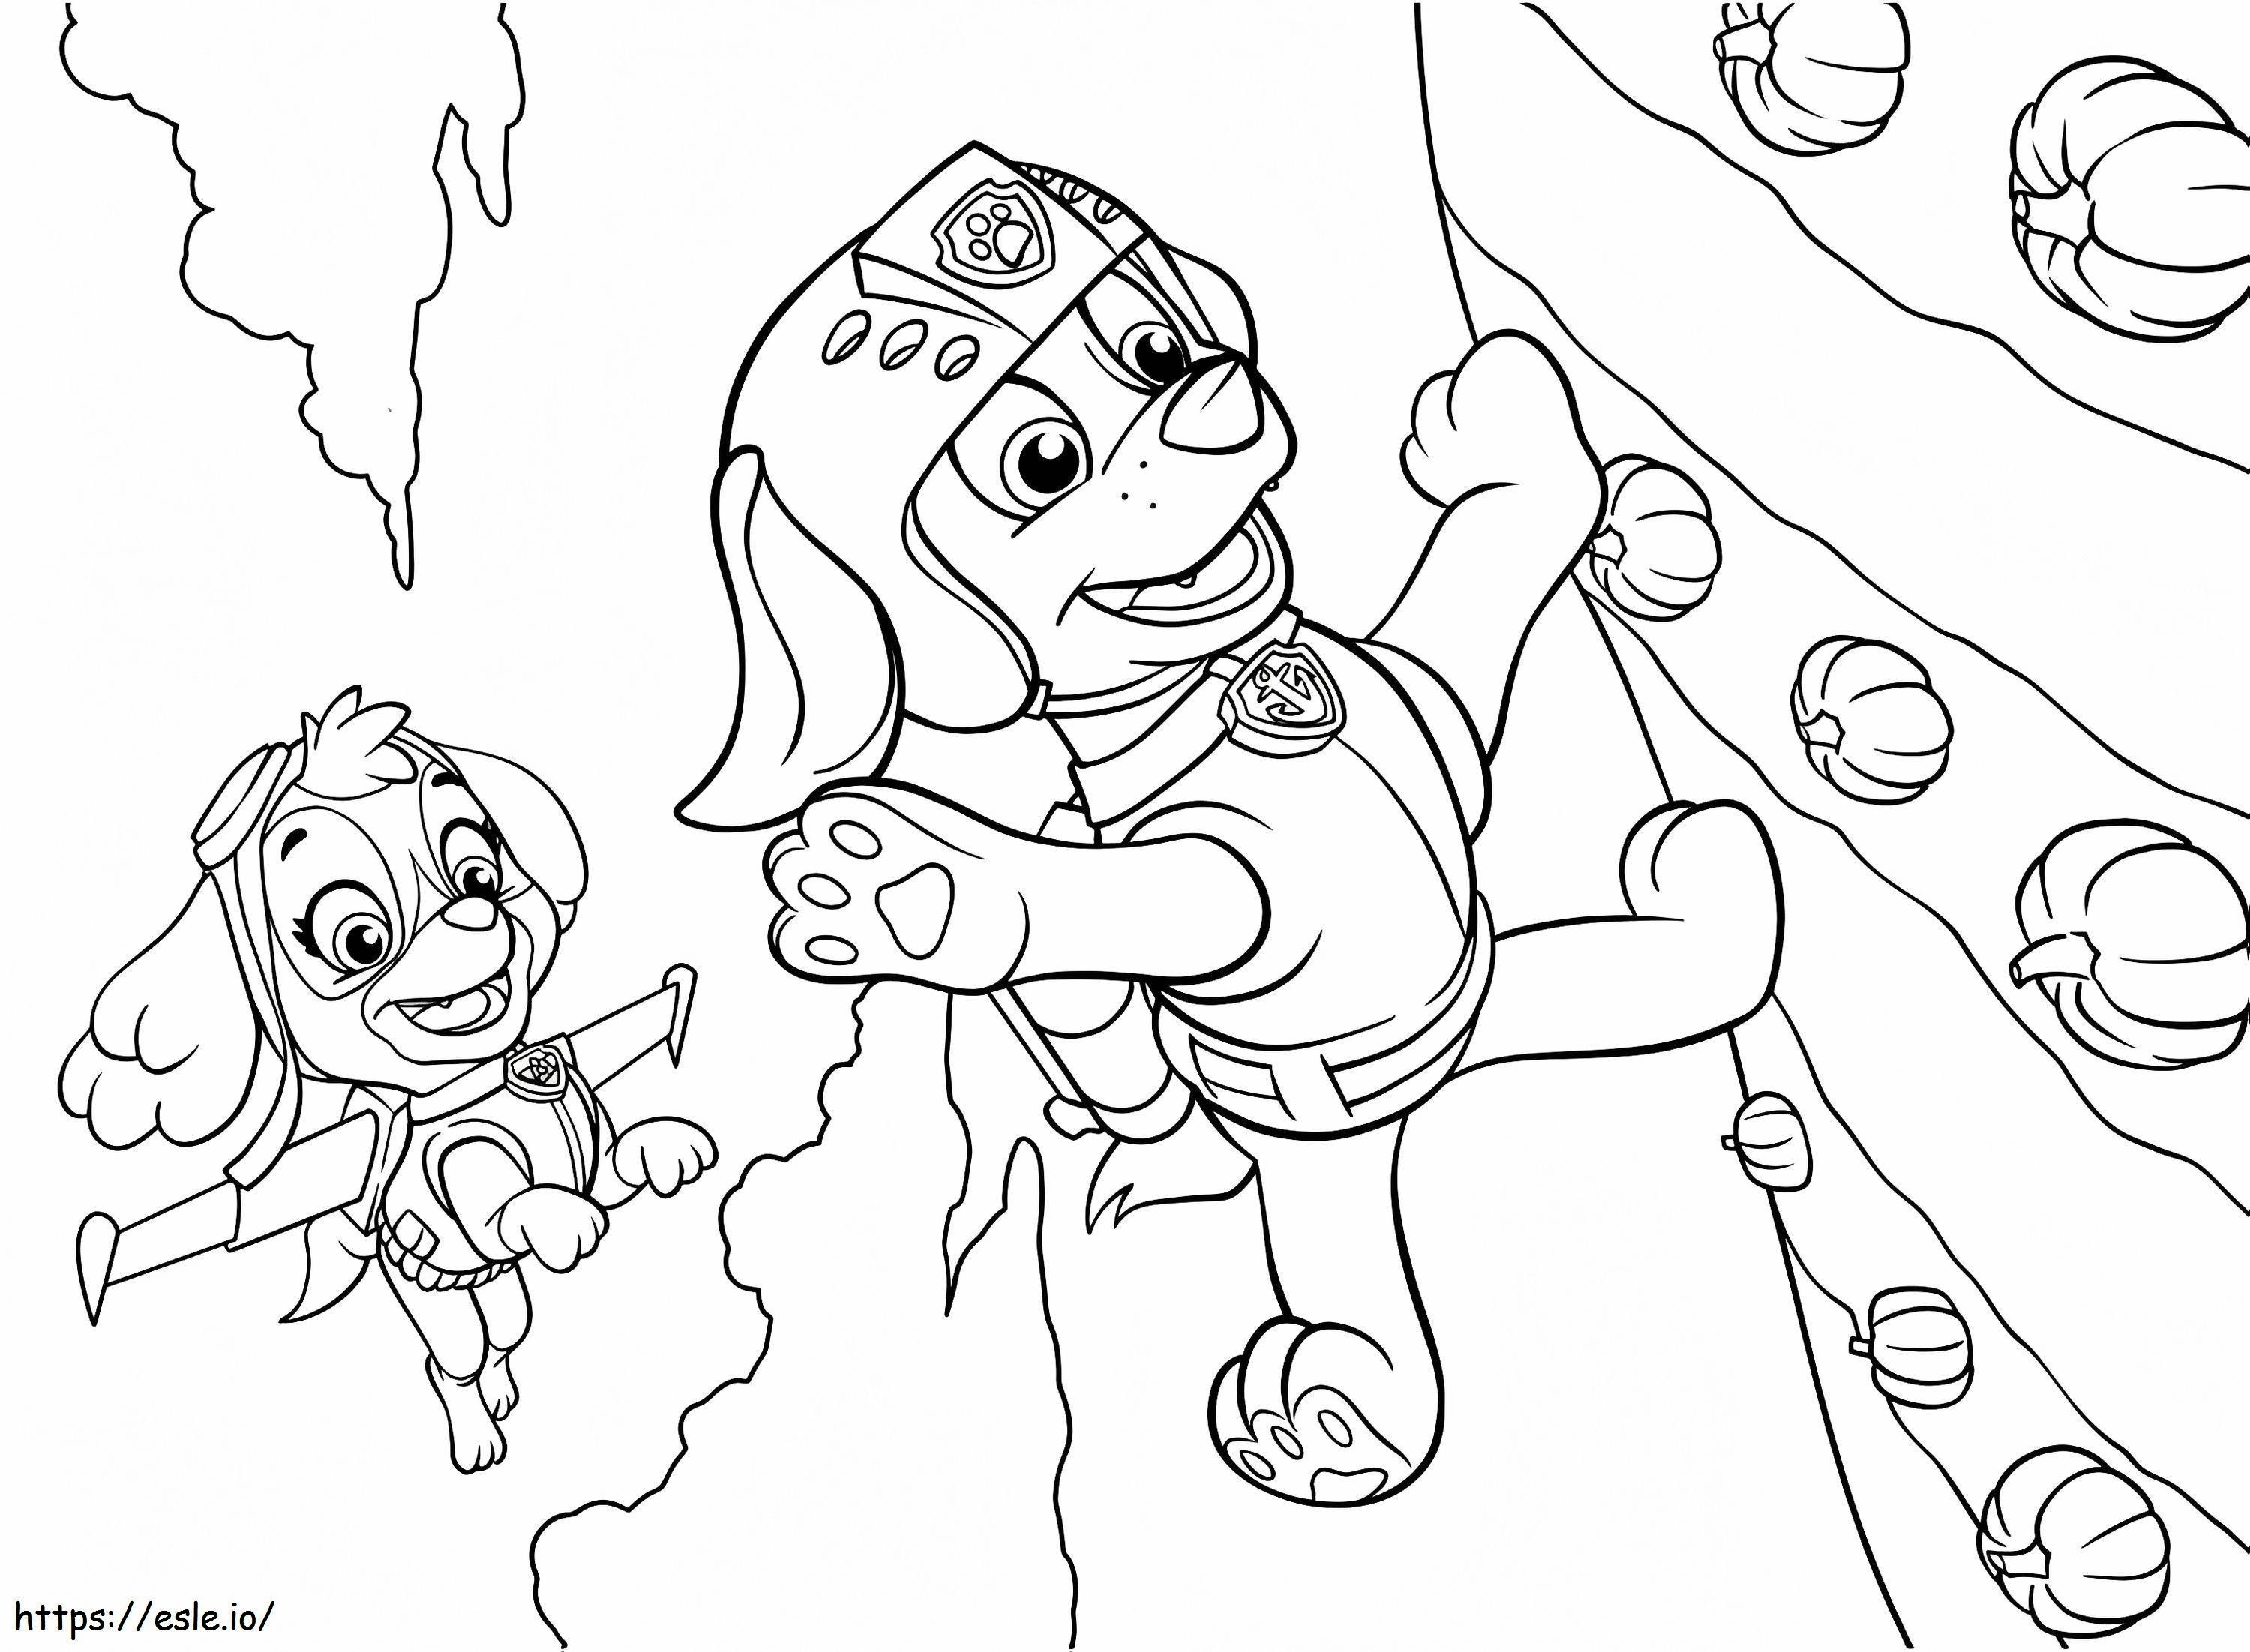 1564709005 Rocky And Skye A4 E1600490418428 coloring page